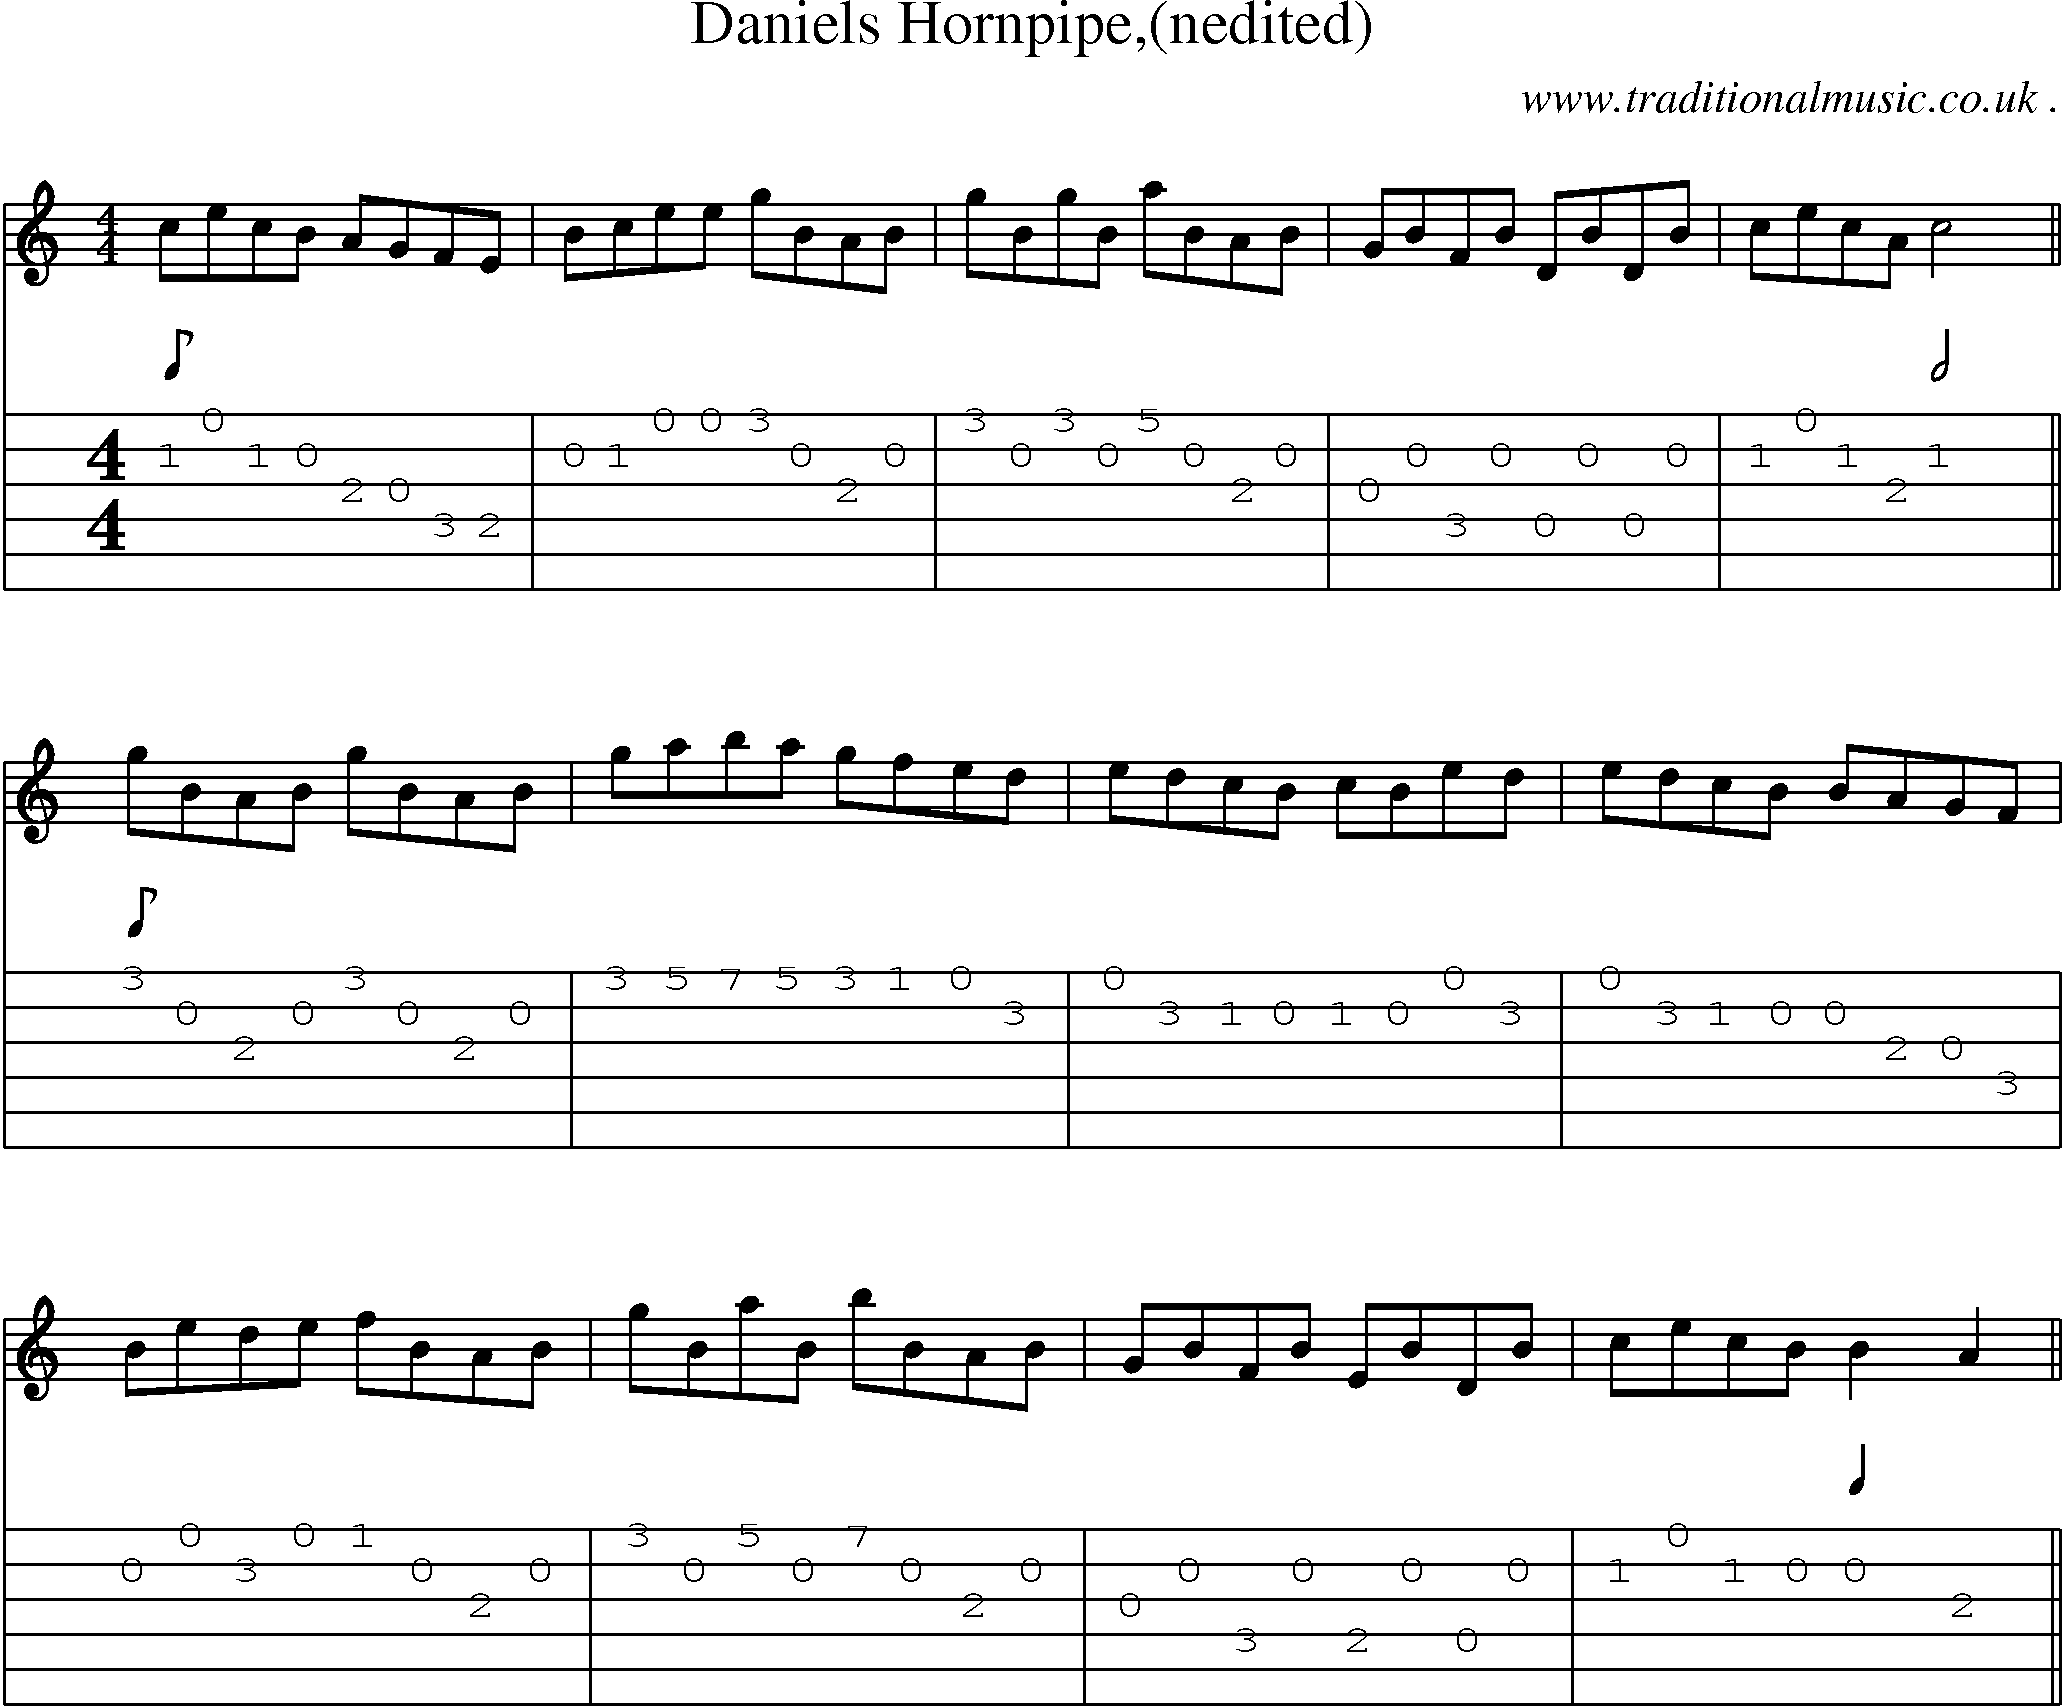 Sheet-Music and Guitar Tabs for Daniels Hornpipe(nedited)